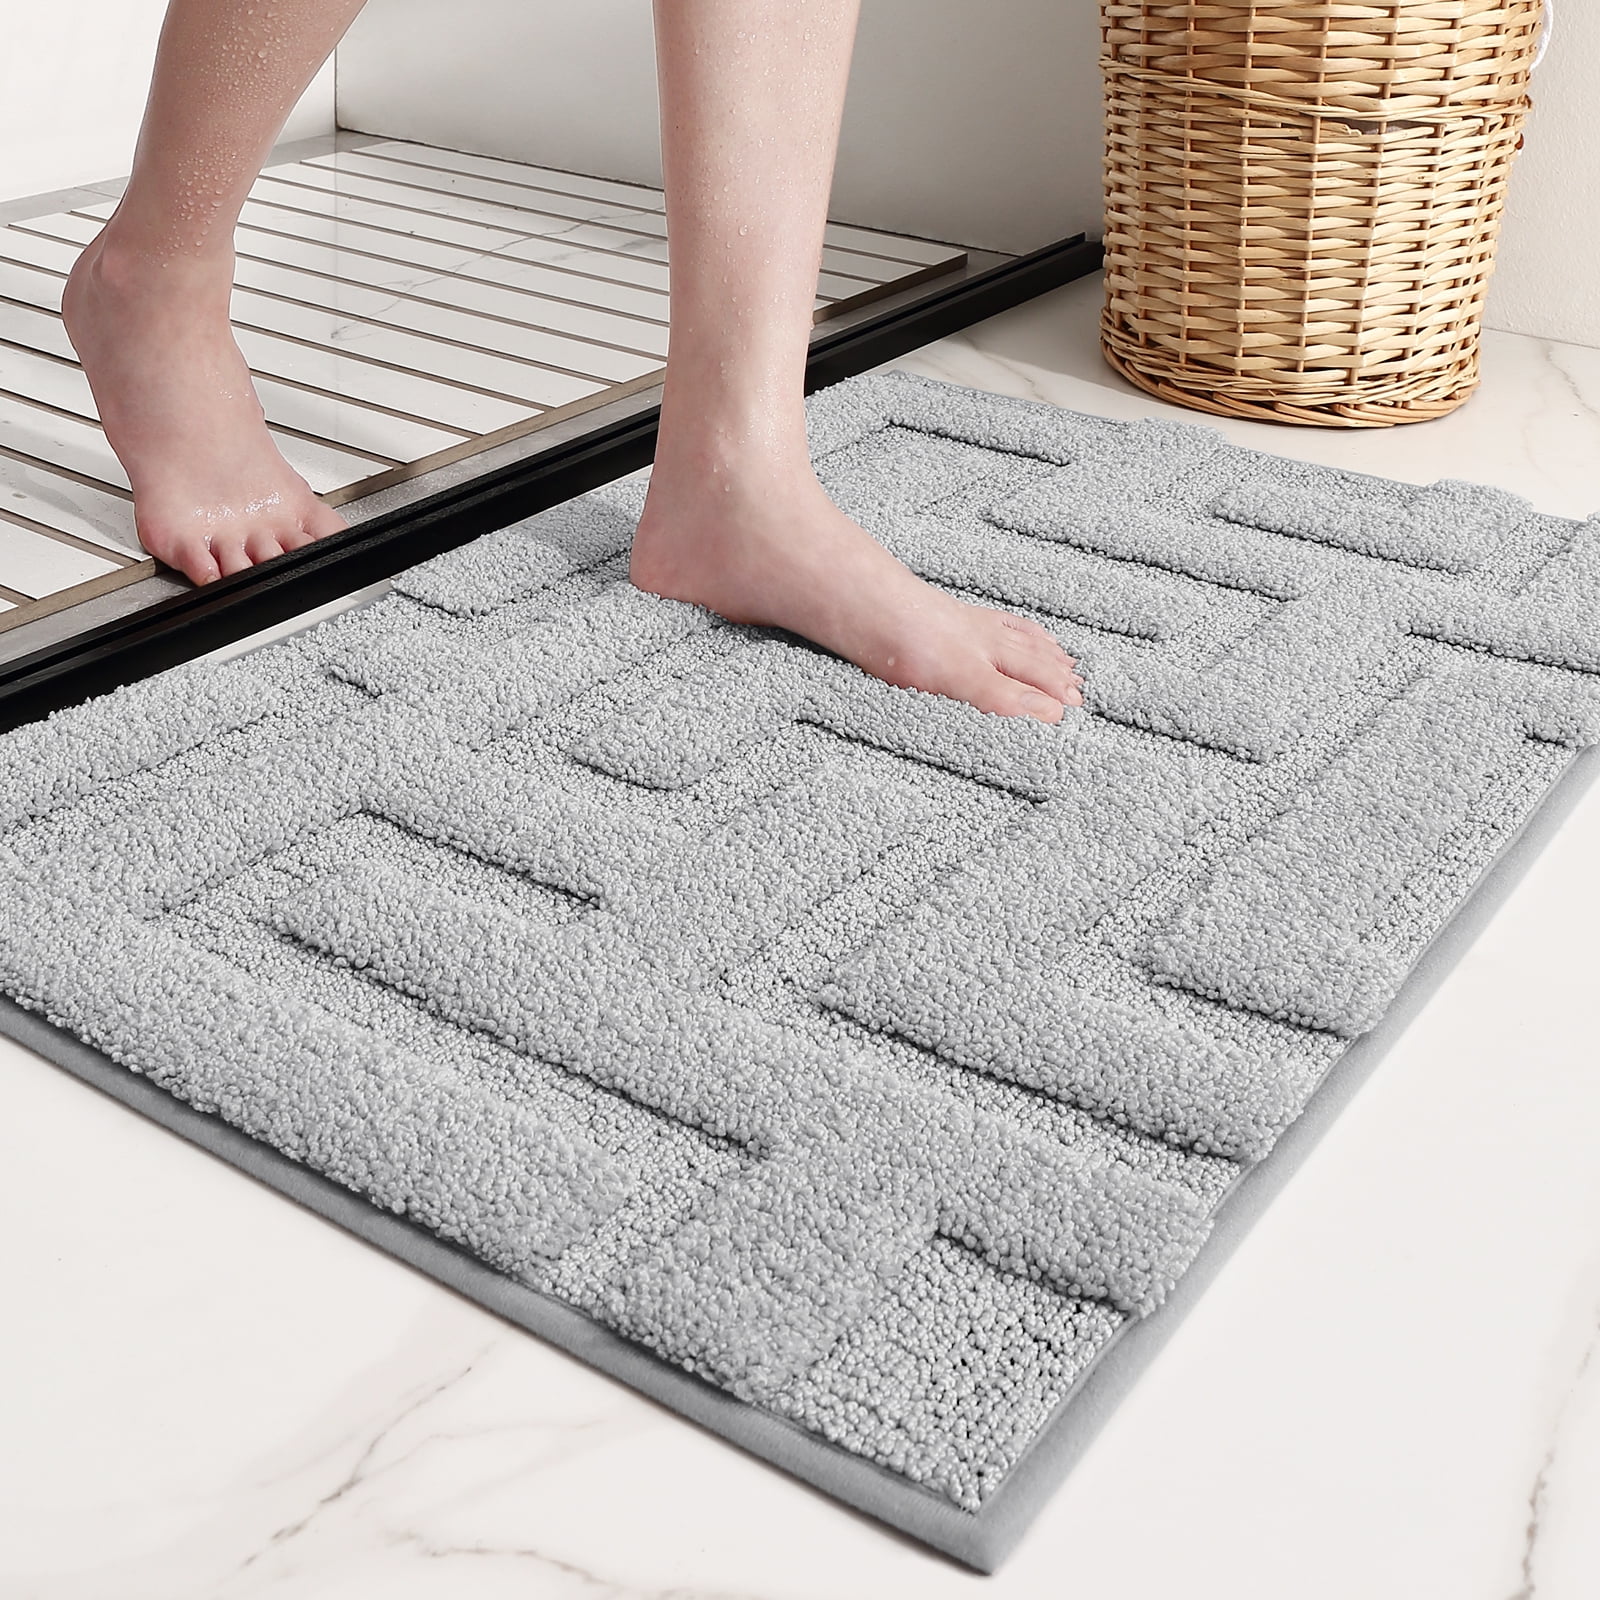 AJZIOJIRO Bath Mat, Thickened Bathroom Foot Wiping Mat, 23.6 x 15.7 x 1.2  inches, Quick Drying, Absorbent, Anti-Slip, Fluffy, Antibacterial